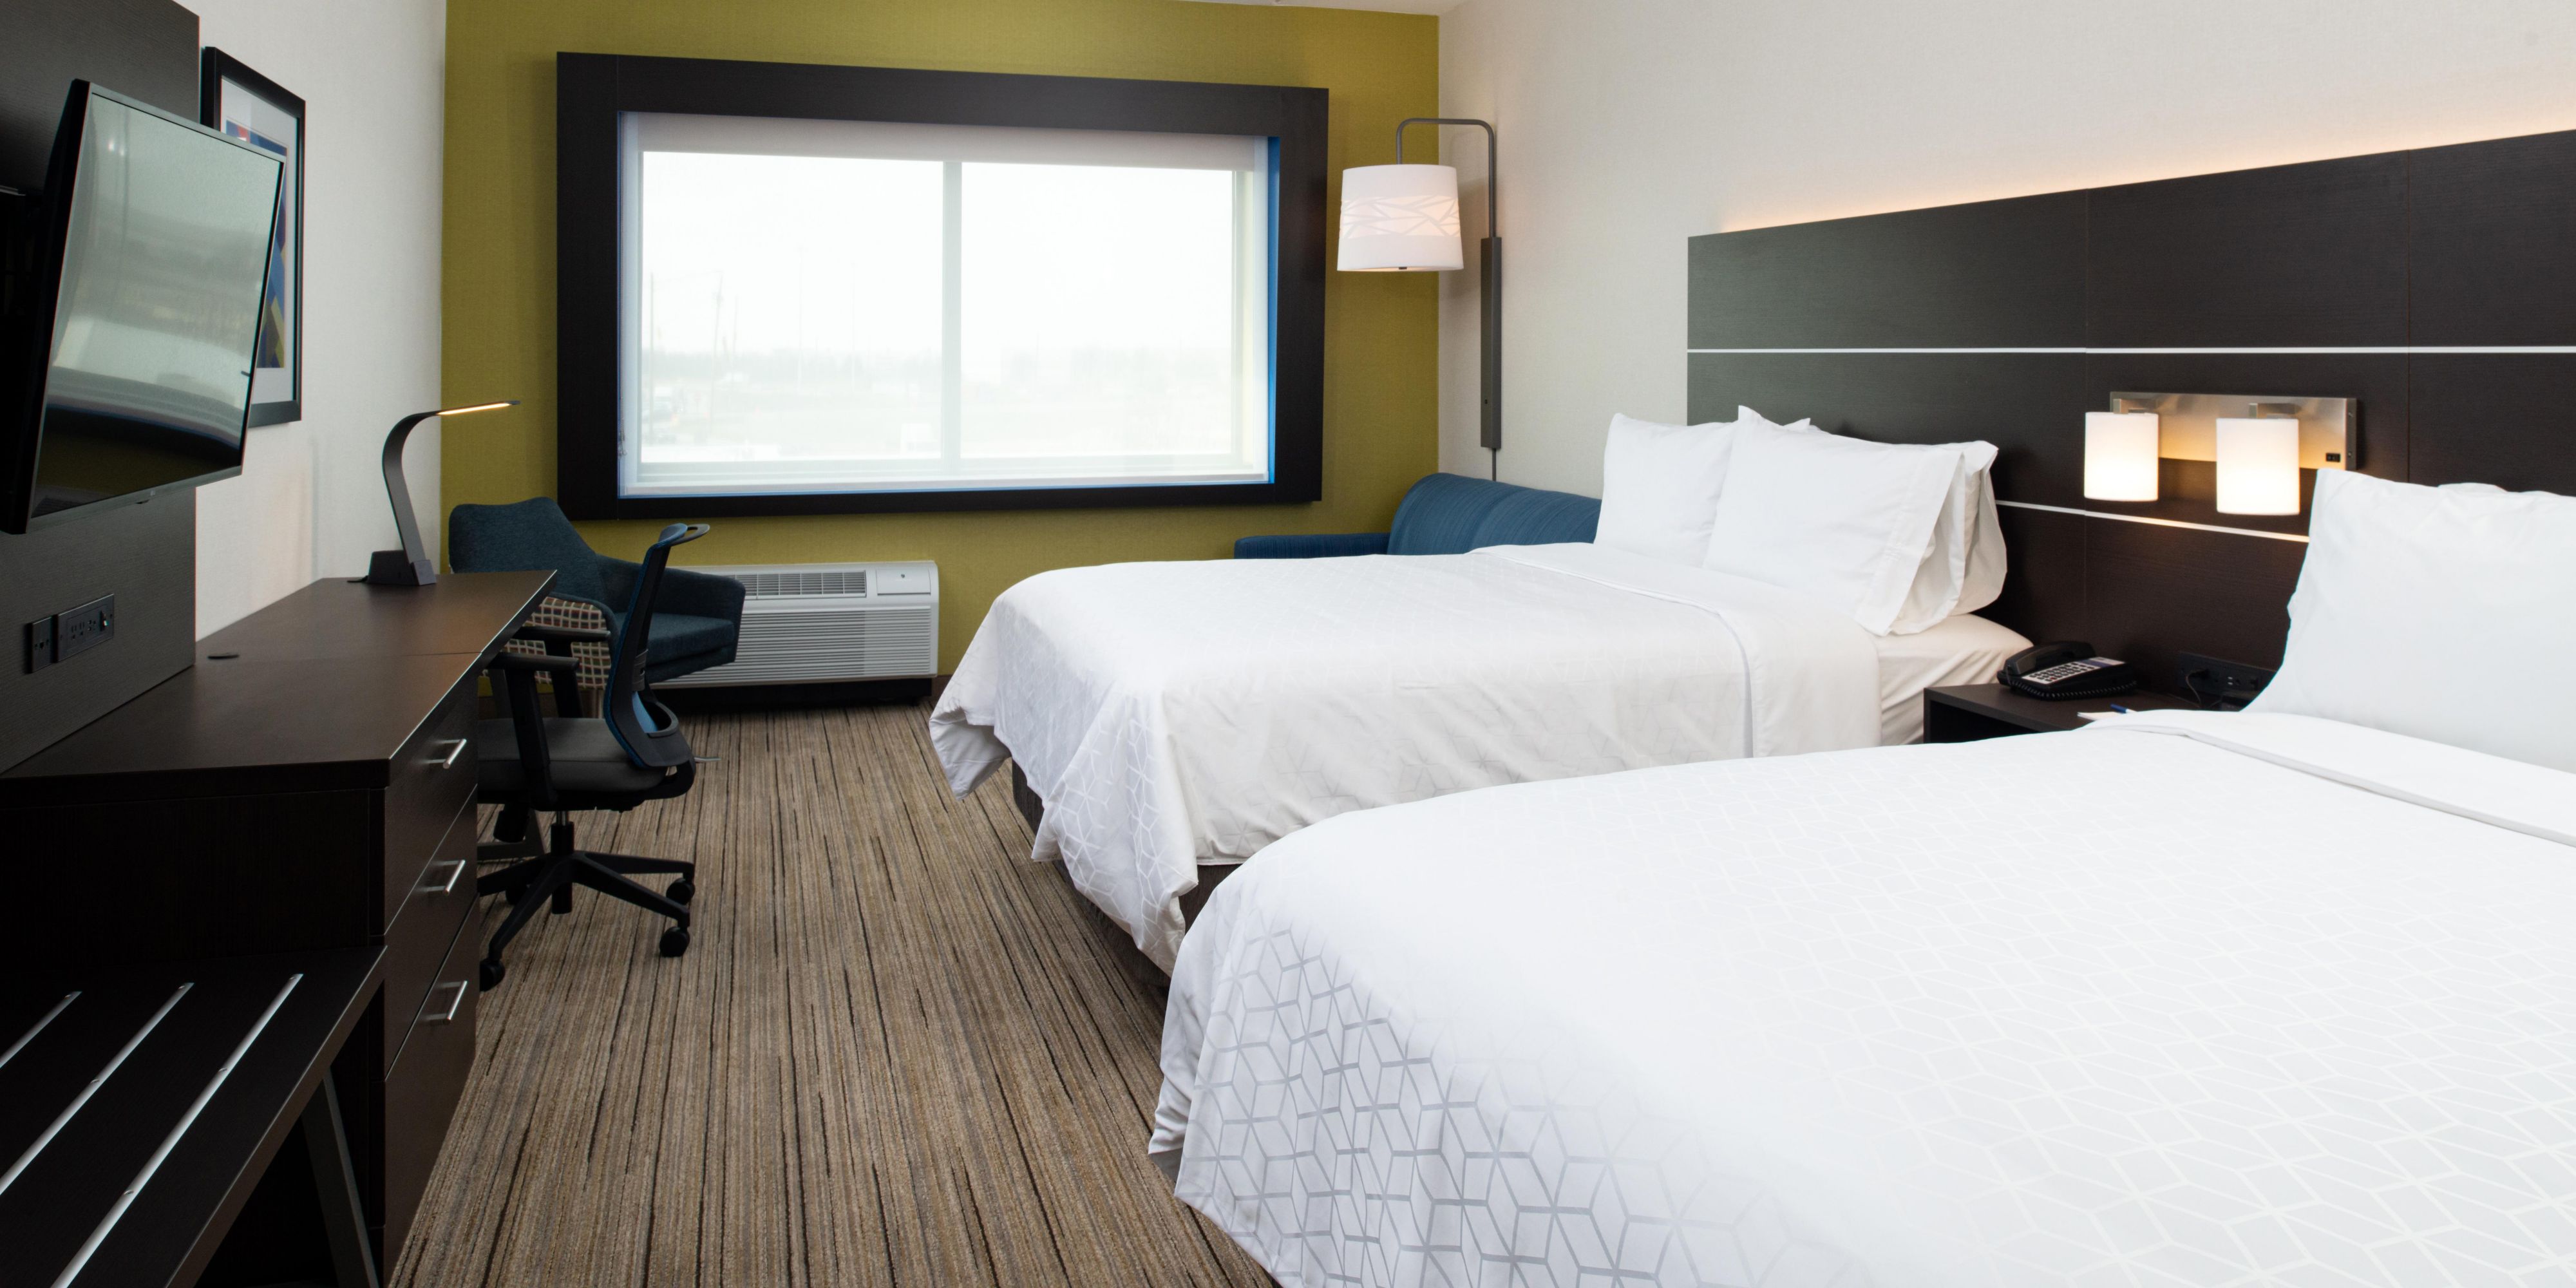 Relax and spread out  in our brand new, well-appointed suites. Call the front desk today!